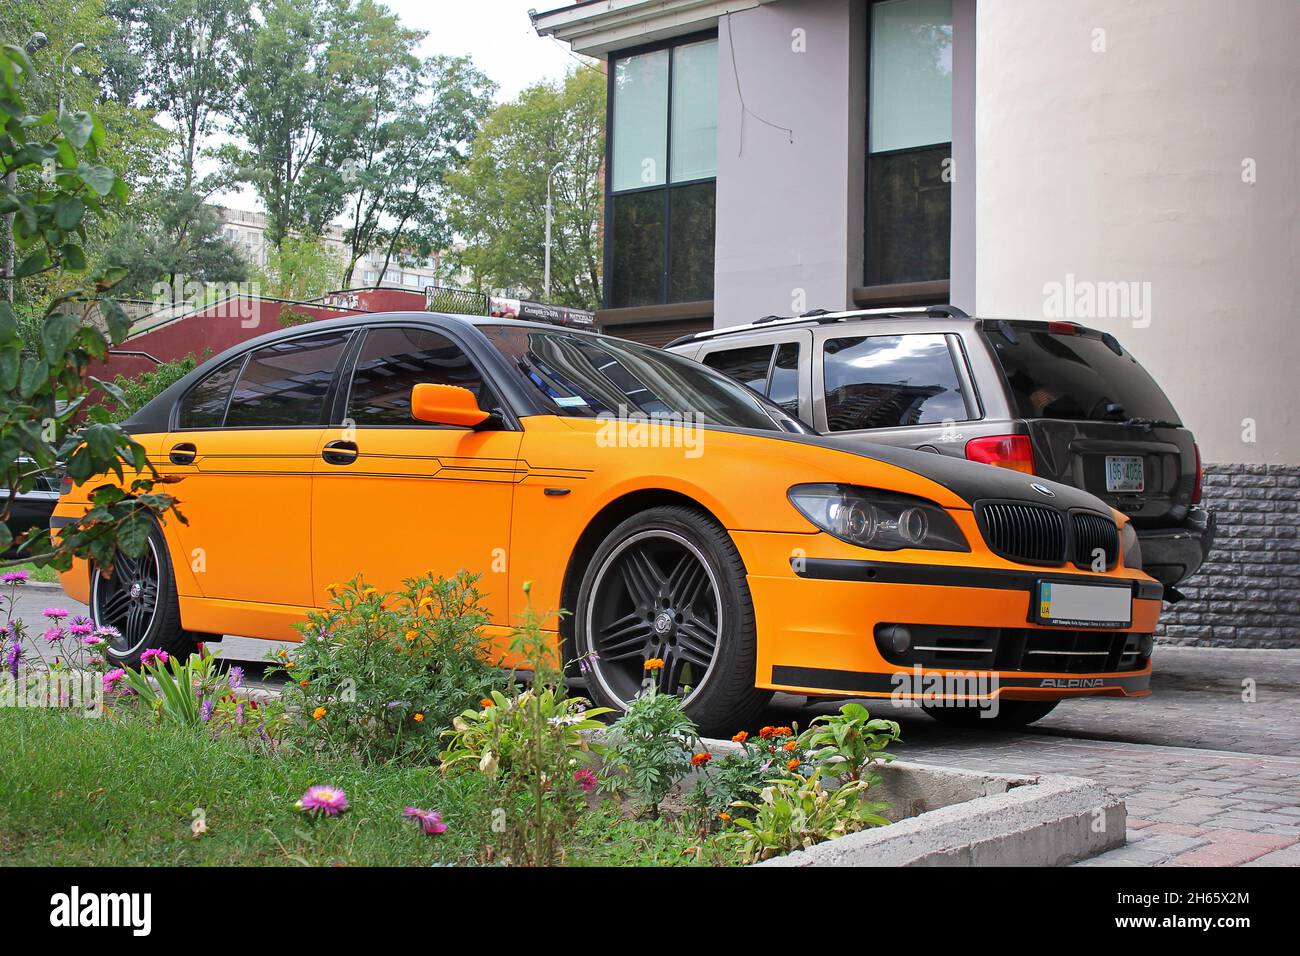 Kiev, Ukraine - September 2, 2017: BMW 7 Series Alpina in an orange matte film against the background of other cars and a house Stock Photo